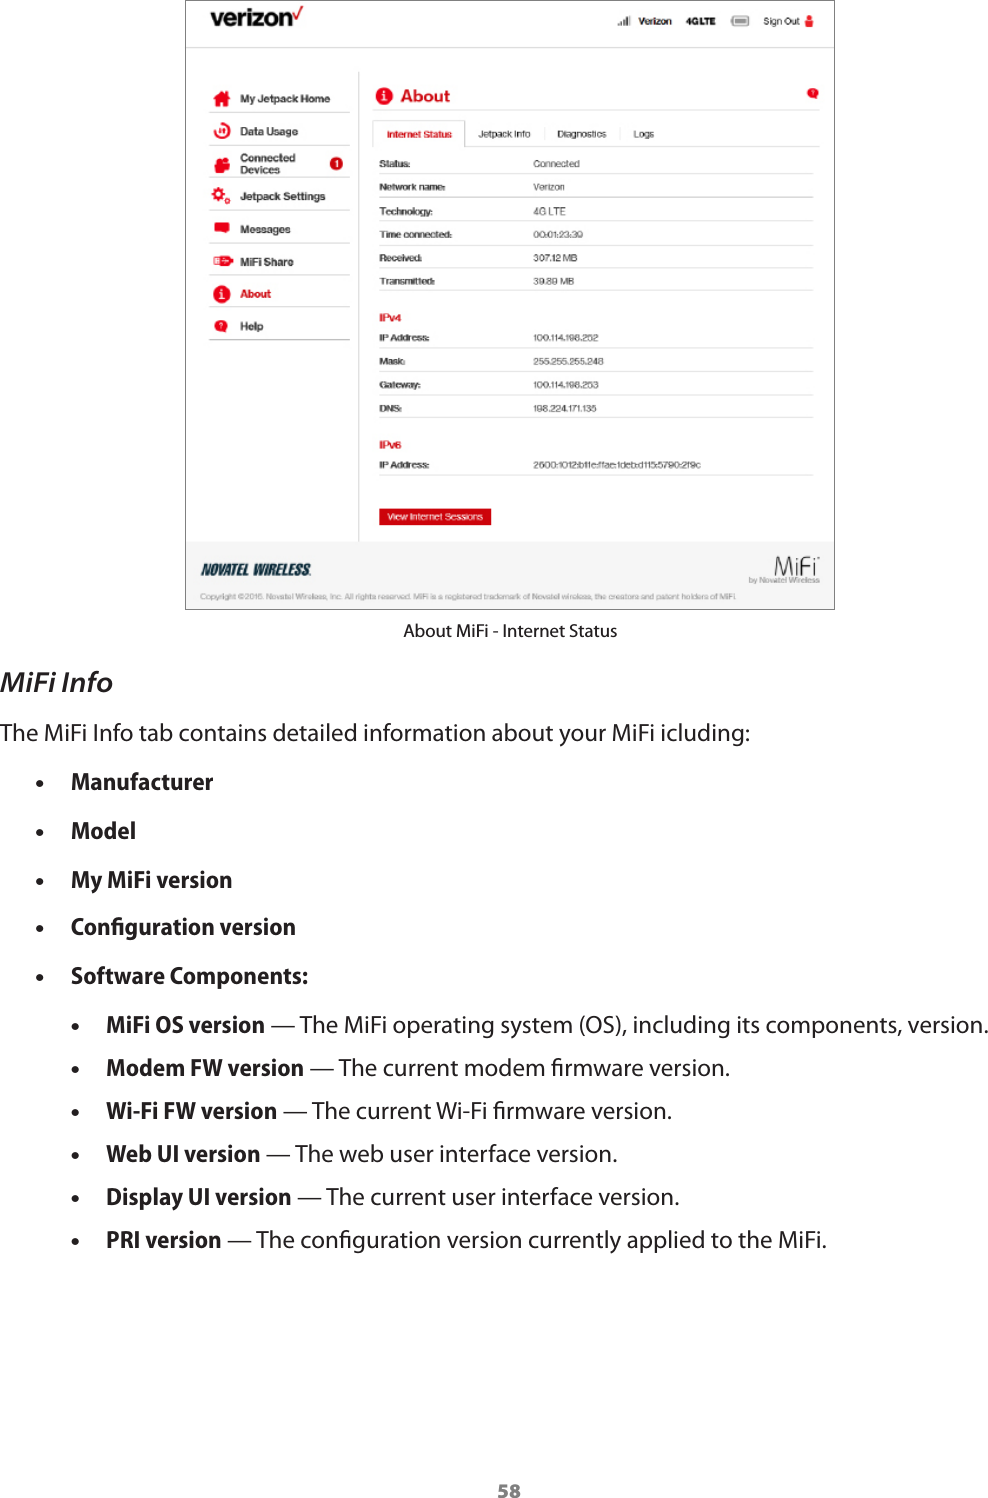 58About MiFi - Internet StatusMiFi InfoThe MiFi Info tab contains detailed information about your MiFi icluding: •Manufacturer •Model •My MiFi version •Conﬁguration version •Software Components: •MiFi OS version — The MiFi operating system (OS), including its components, version. •Modem FW version — The current modem rmware version. •Wi-Fi FW version — The current Wi-Fi rmware version. •Web UI version — The web user interface version. •Display UI version — The current user interface version. •PRI version — The conguration version currently applied to the MiFi.